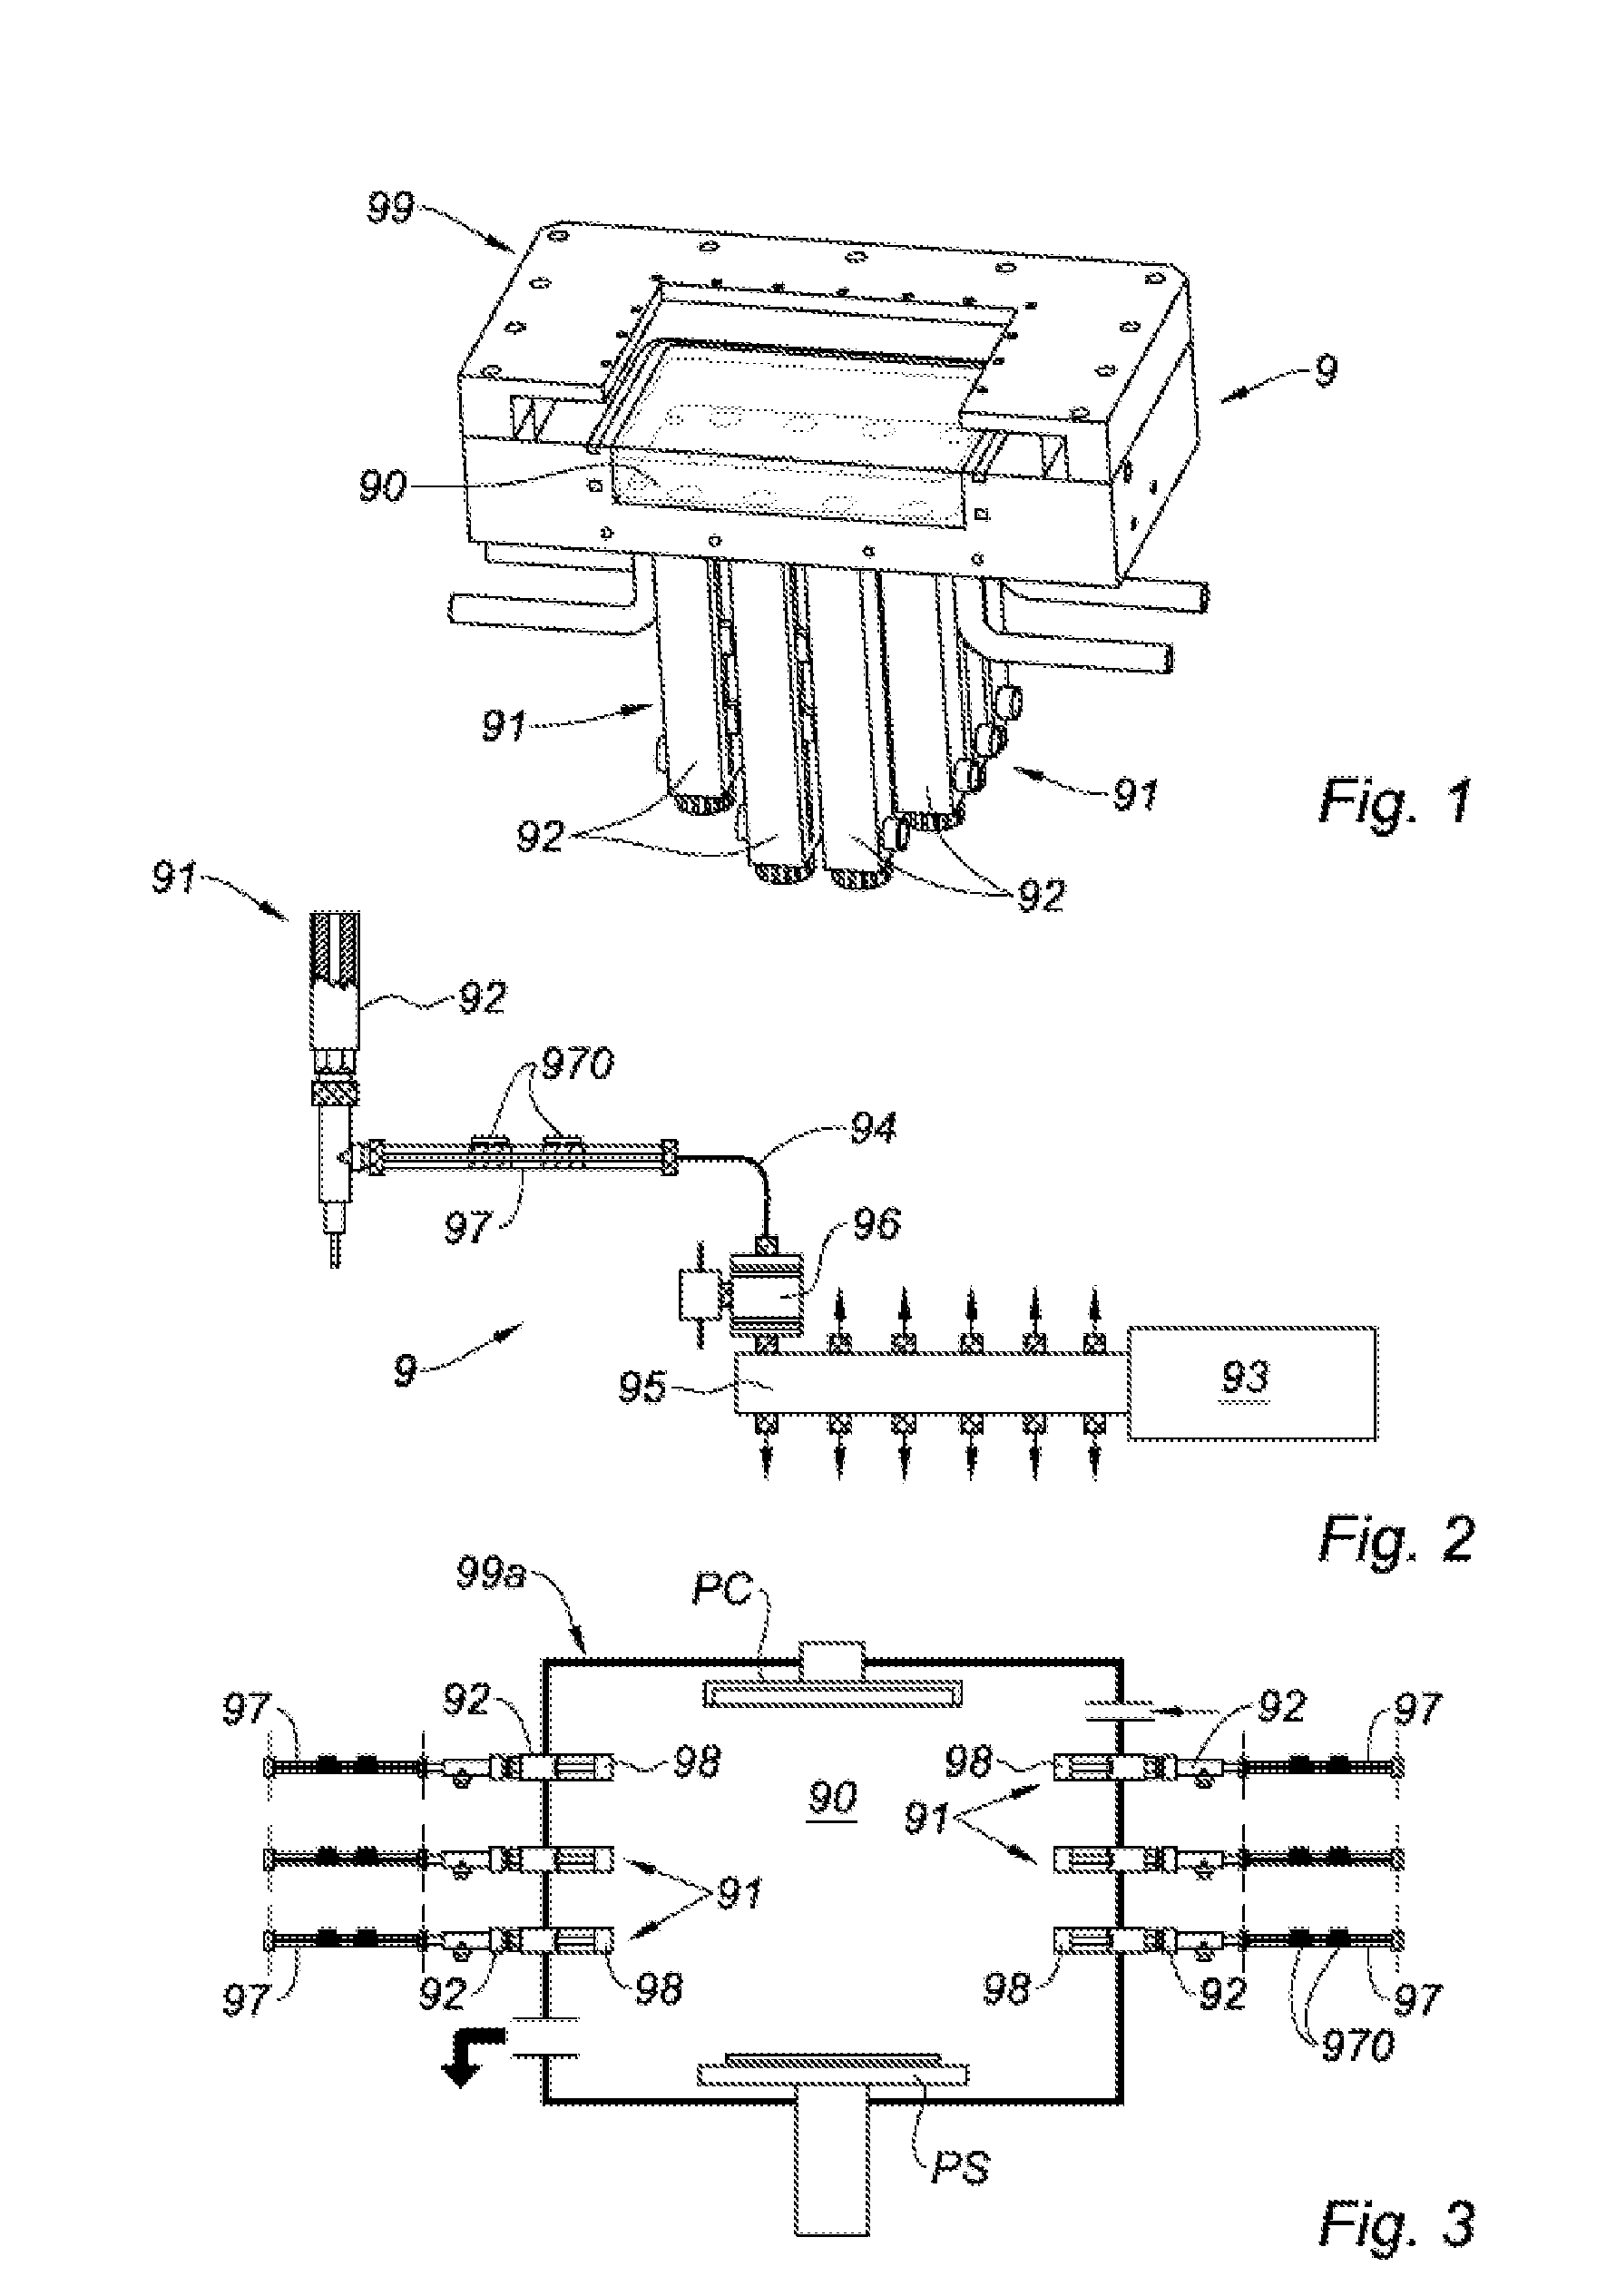 Facility for microwave treatment of a load